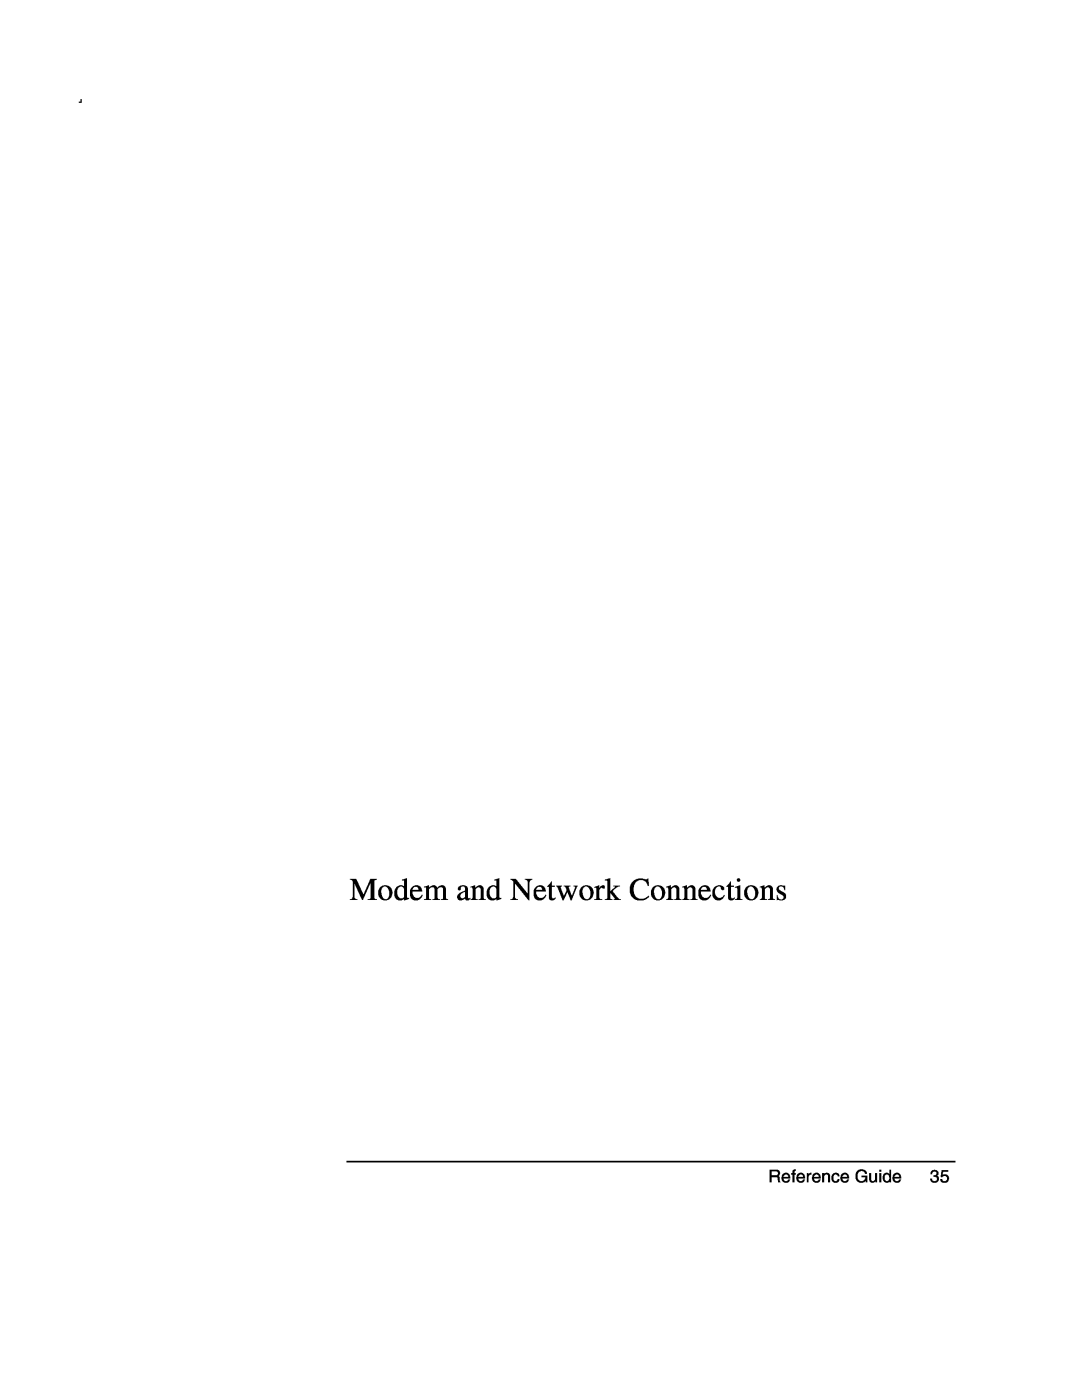 Compaq AMC20493-KT5 manual Modem and Network Connections, Reference Guide 